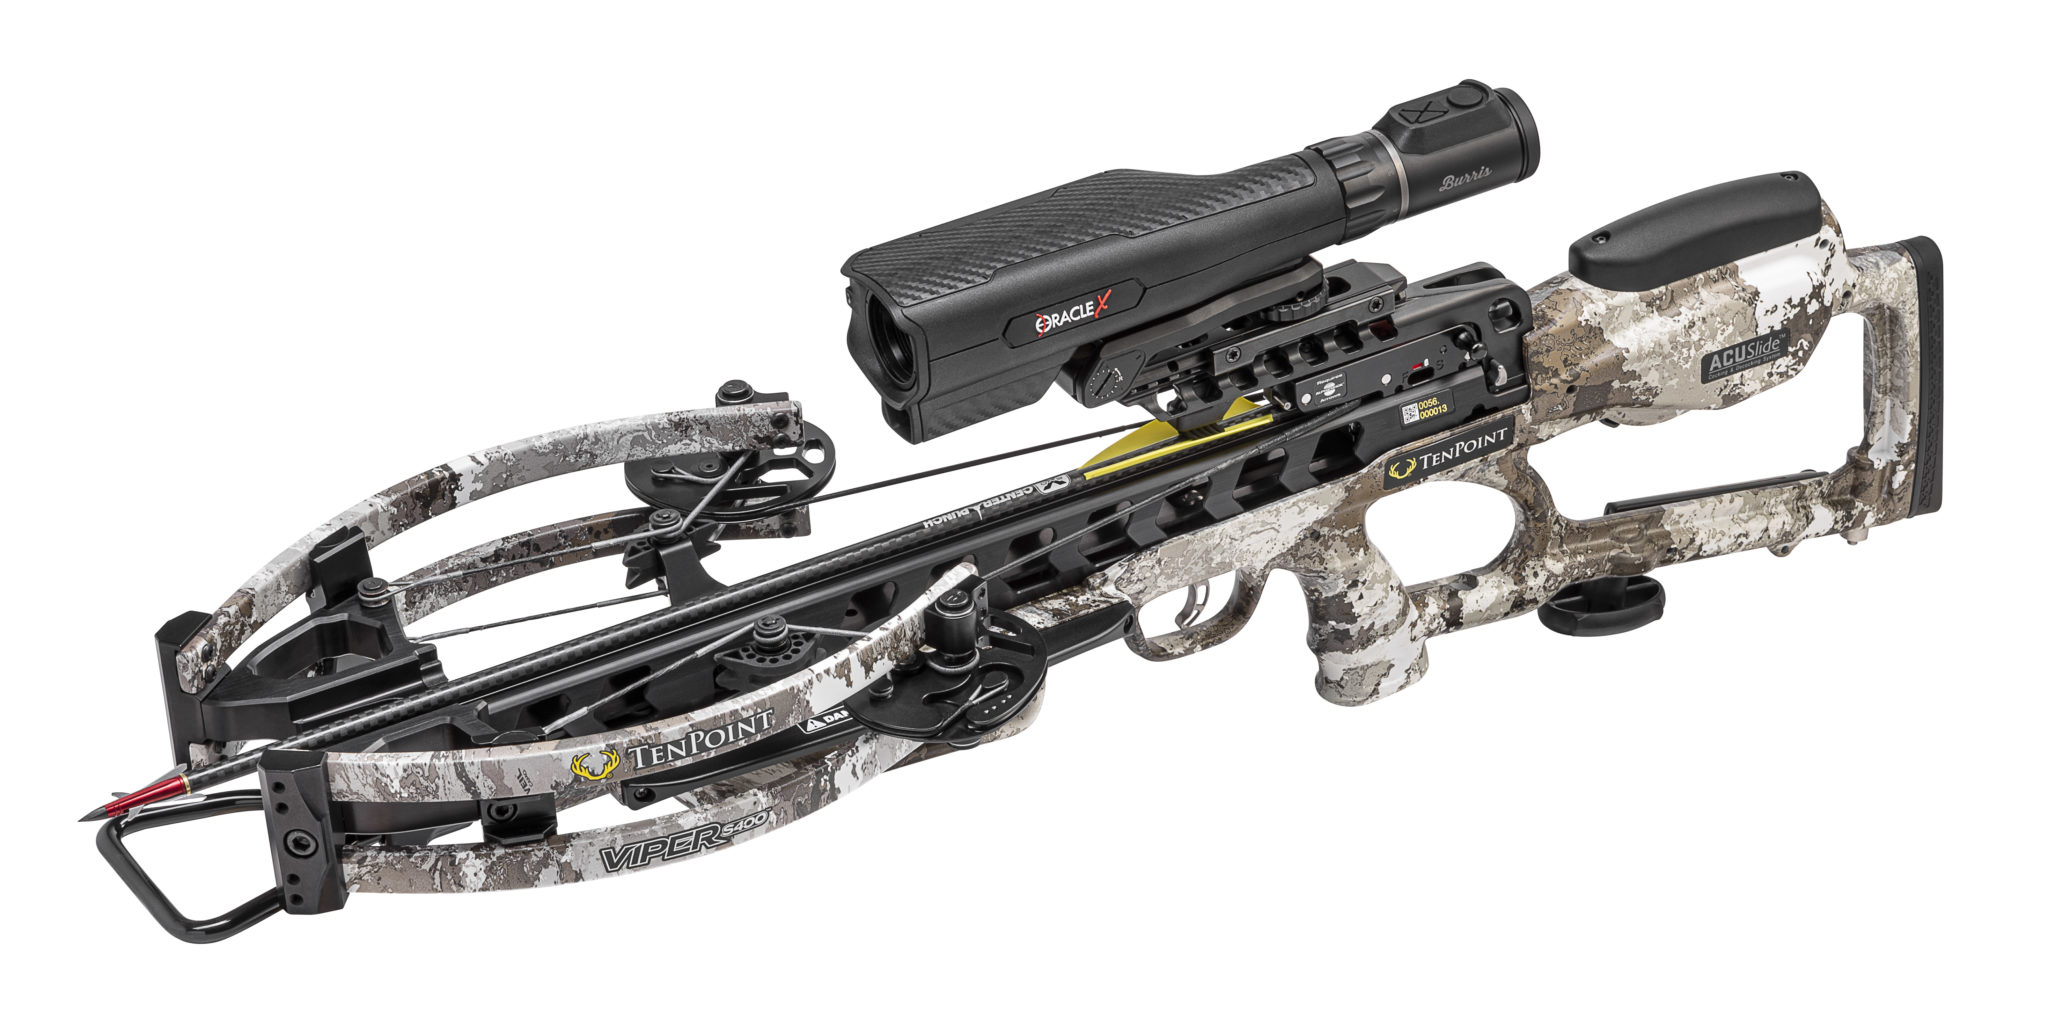 The NEW Viper S400 crossbow equipped with Oracle X from TenPoint